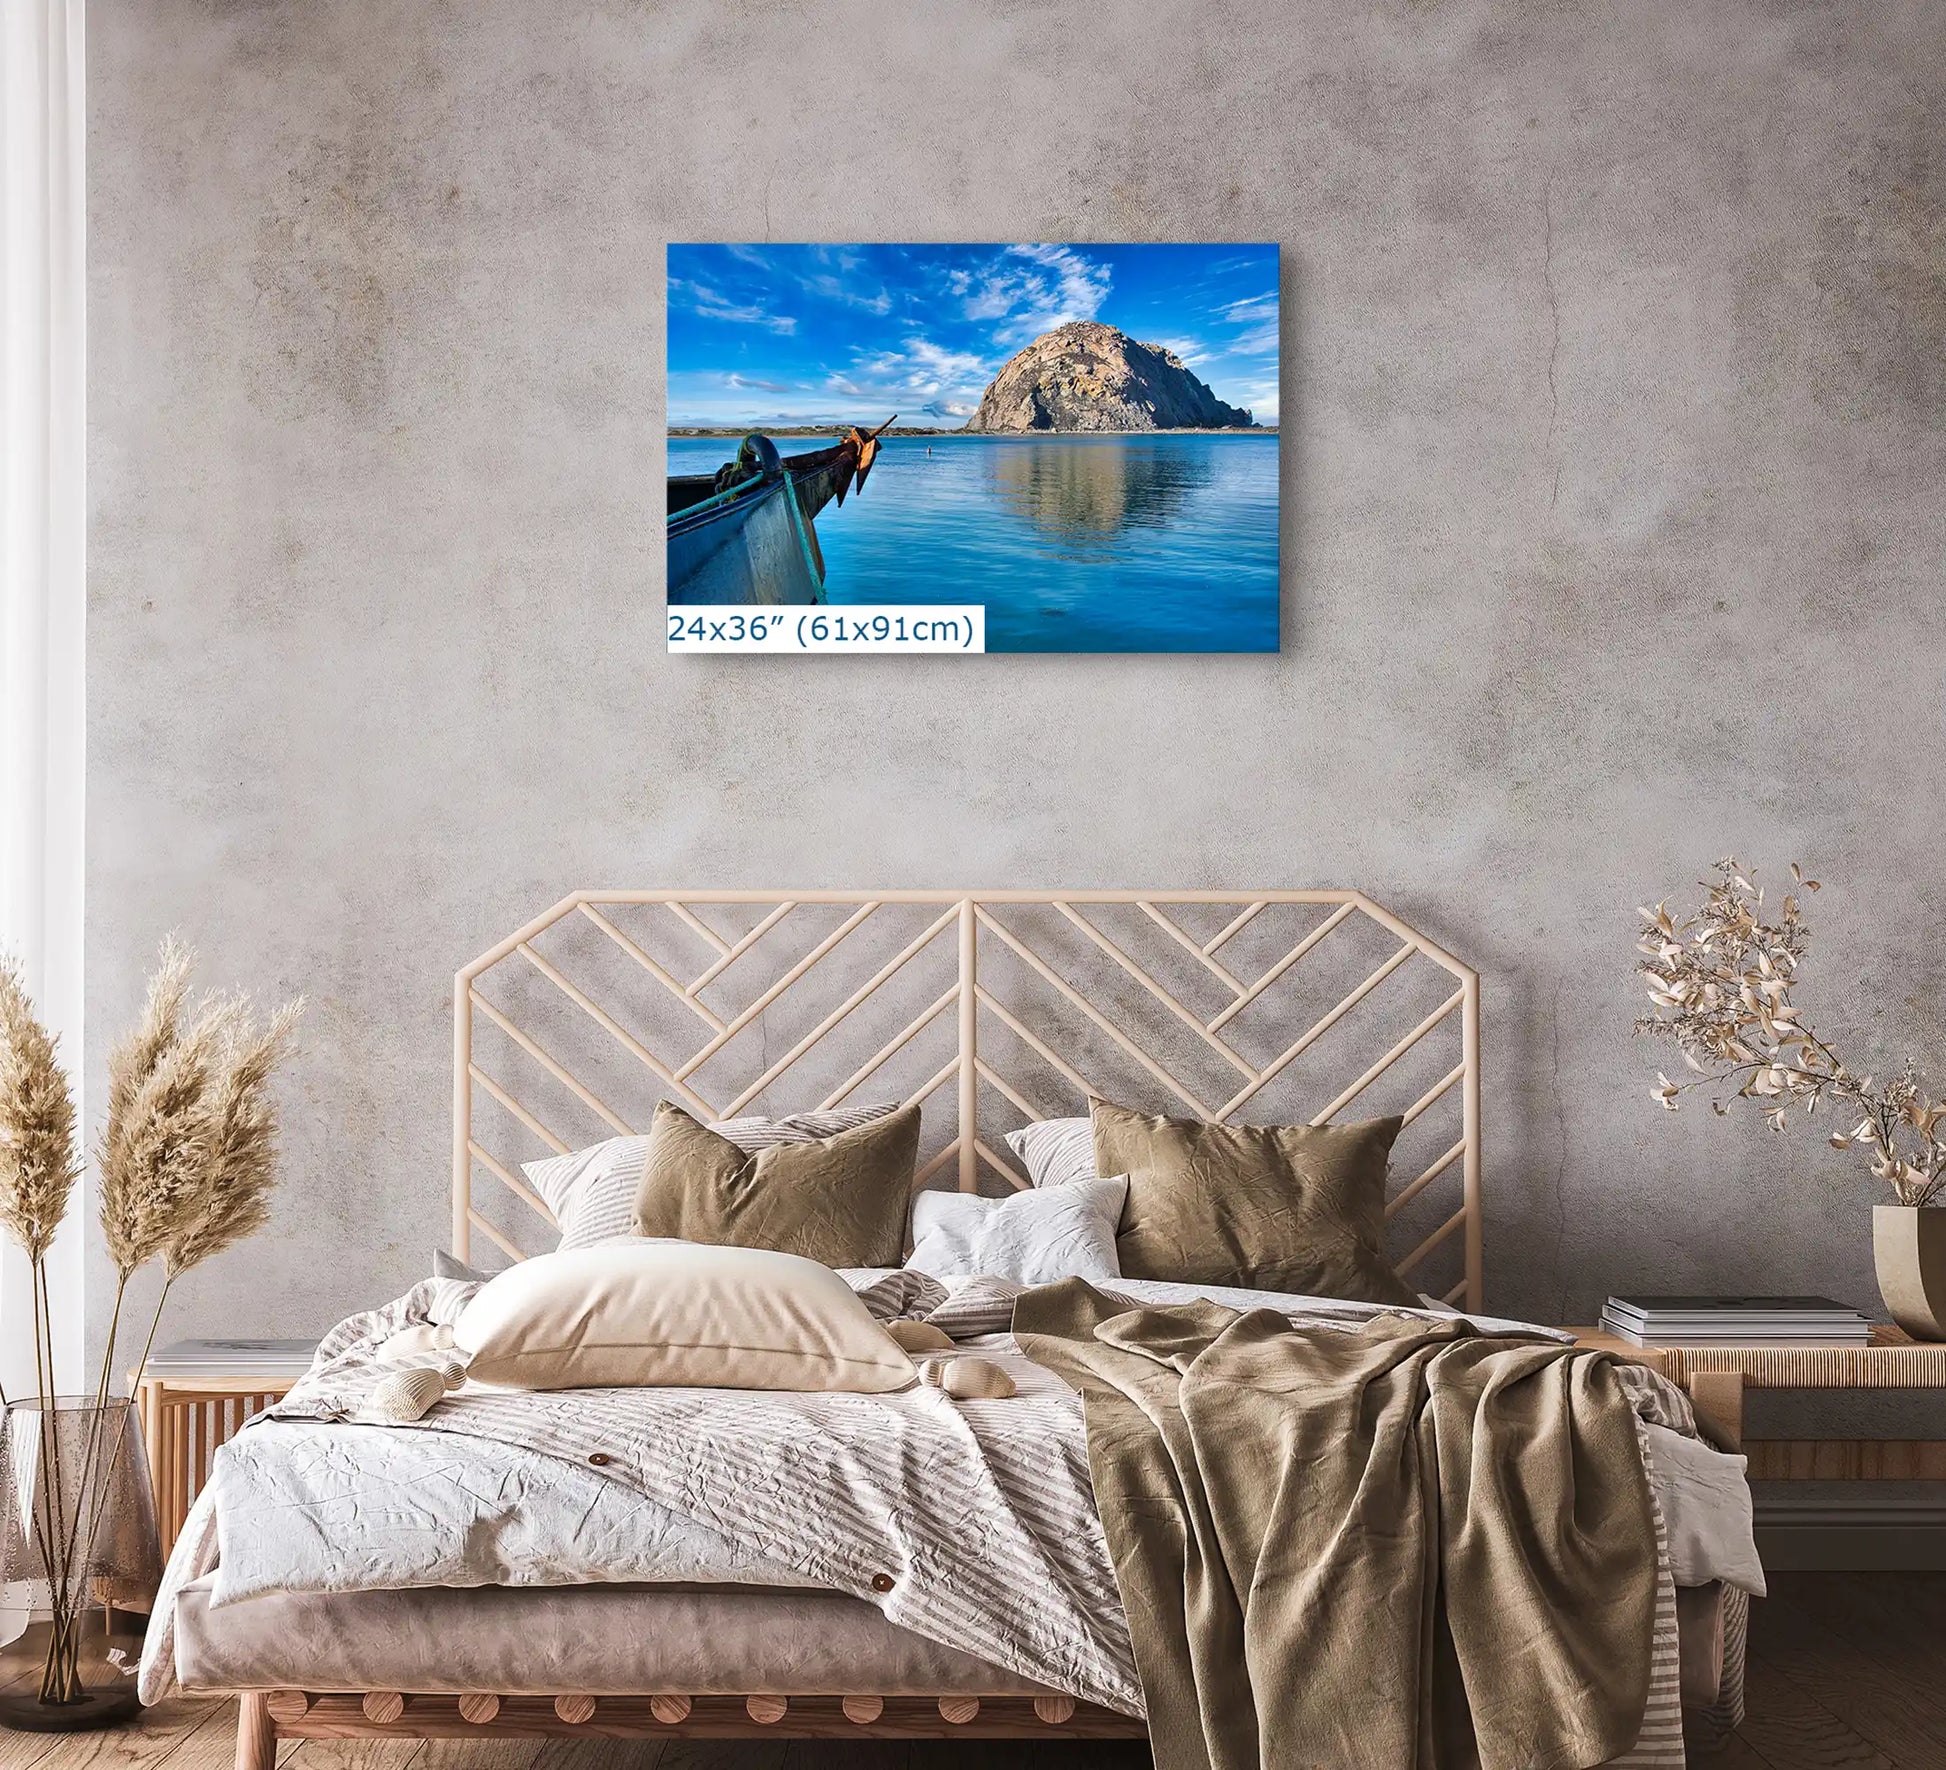 A peaceful bedroom enhanced by the presence of Morro Rock canvas wall art, evoking the serene spirit of California's coastline with a 24x36 art hanging over the bed.